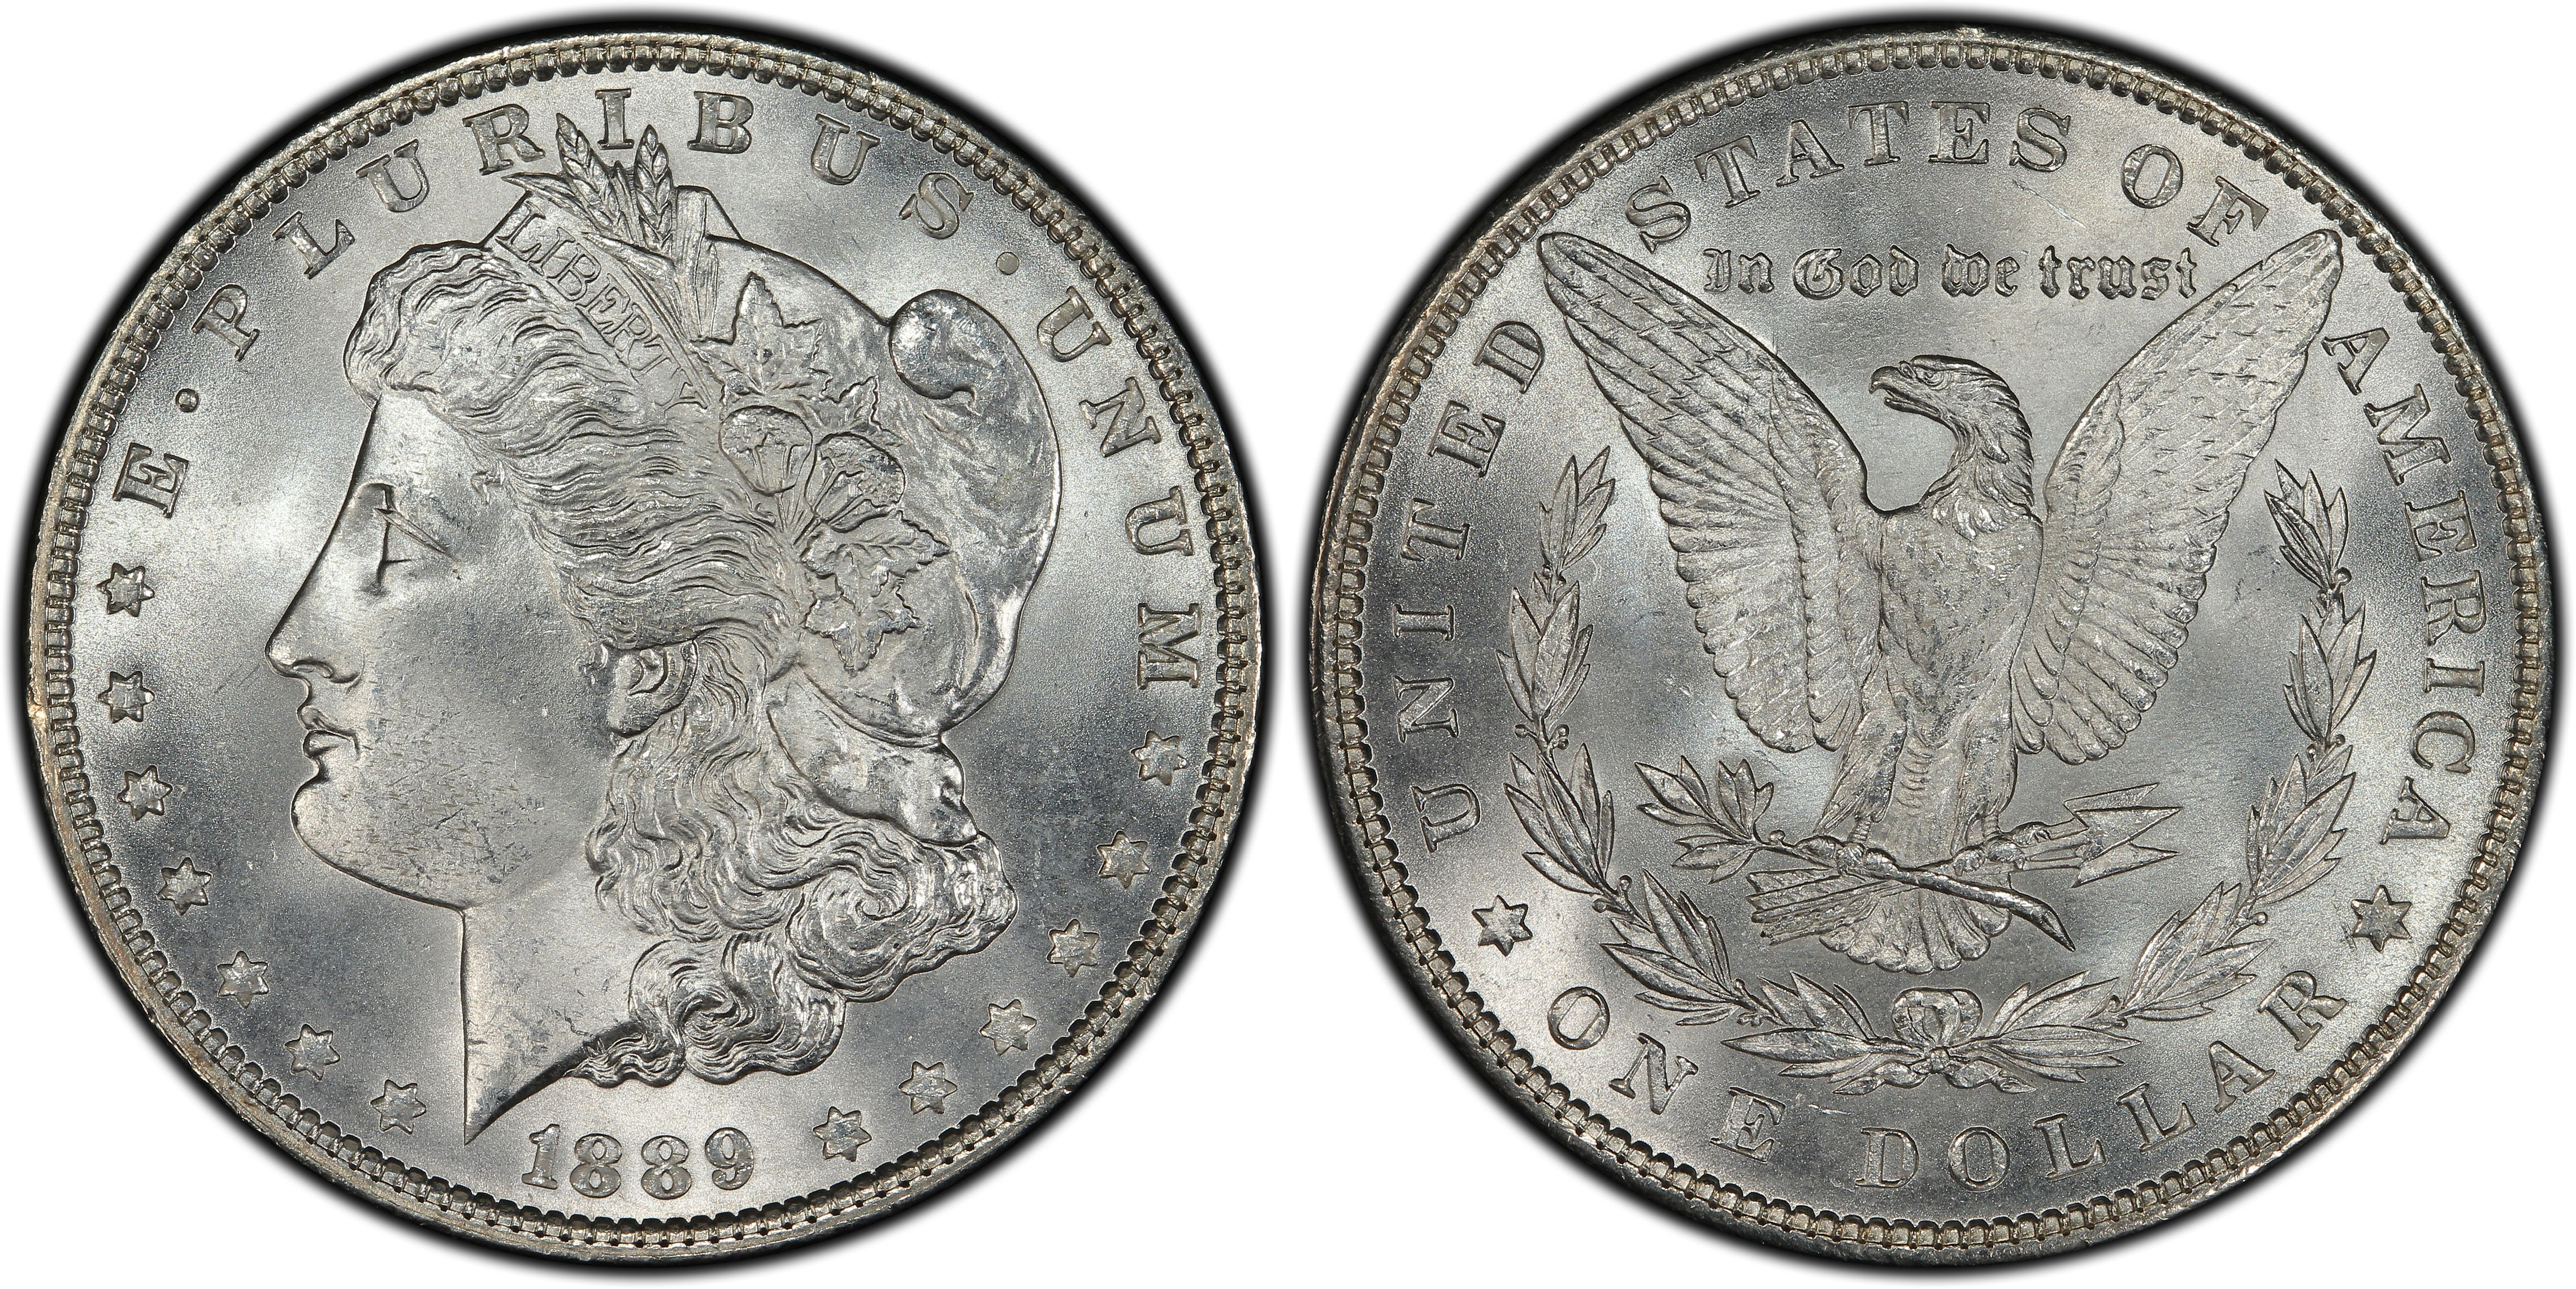 Details about   1889 MORGAN SILVER DOLLAR MS 62 NGC 5894849-026;  029 